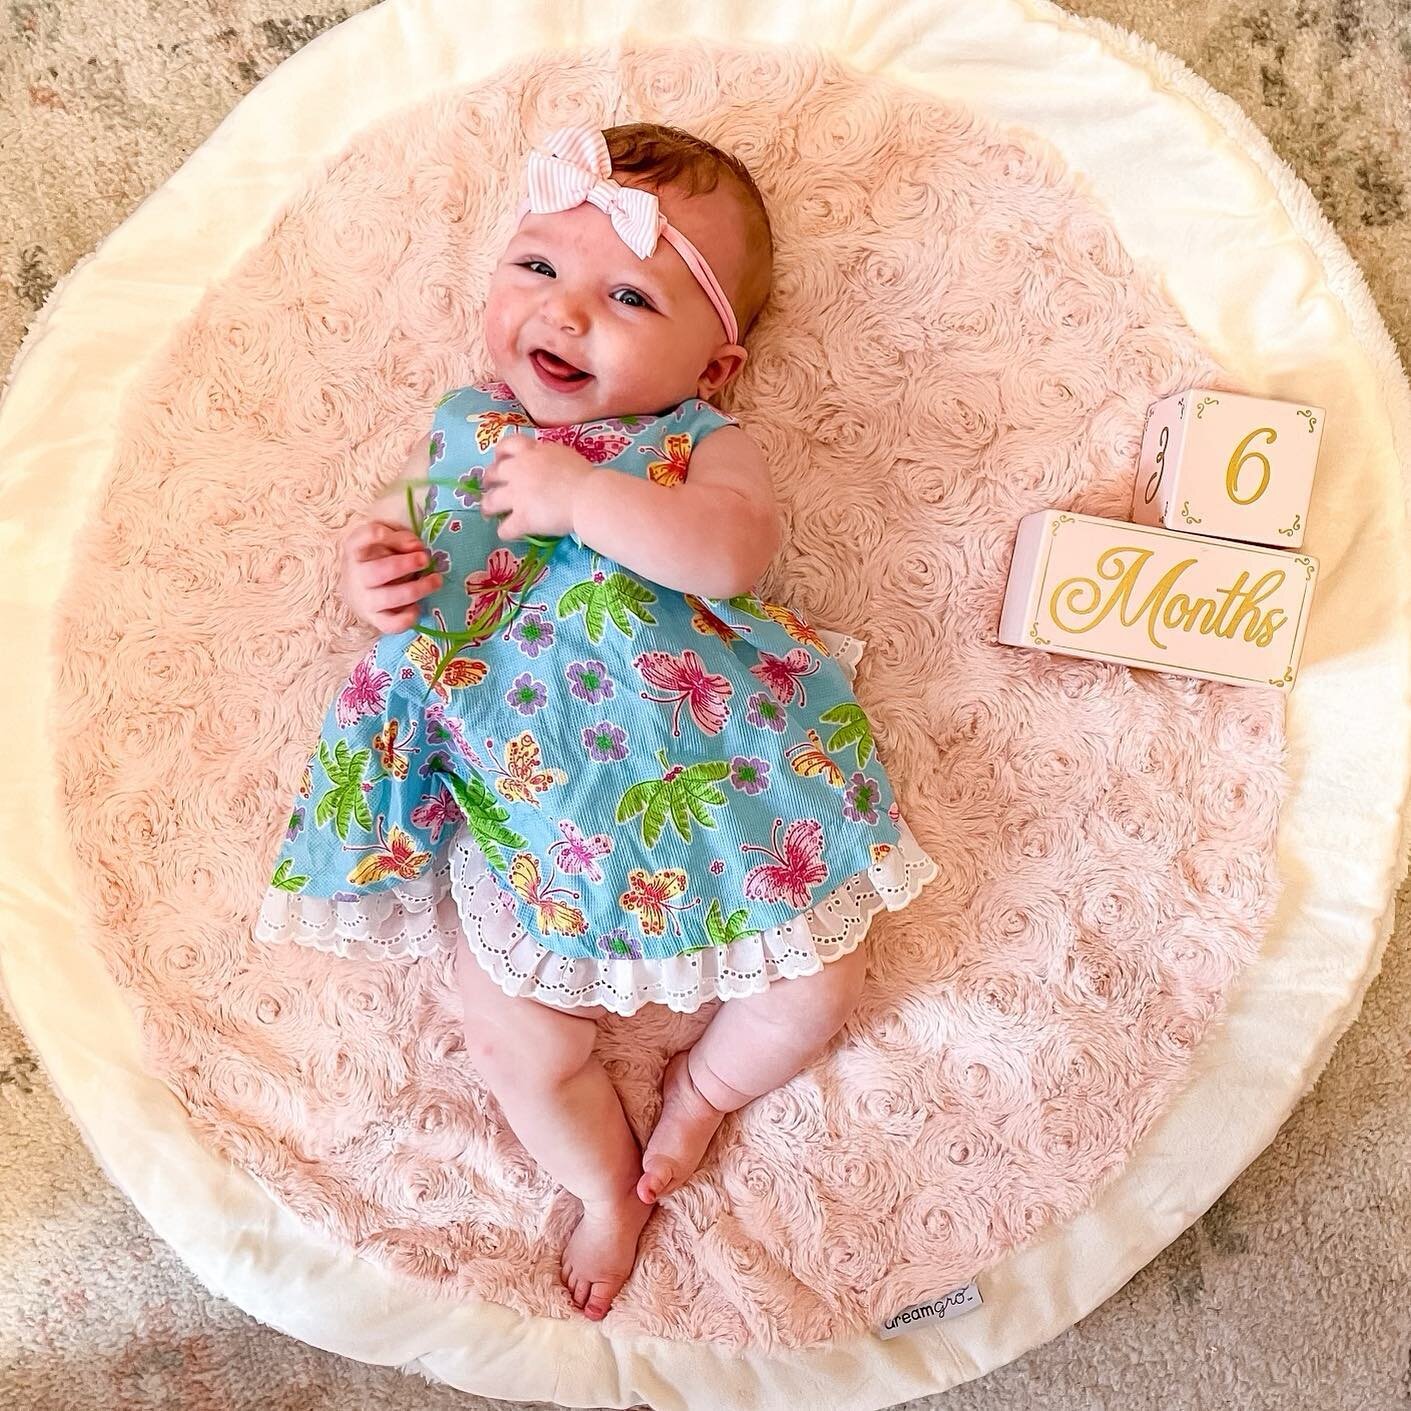 6 months of Vienna Rose 🎀

These photo shoots are becoming more of a workout (she doesn&rsquo;t like to sit still!) but life is getting sweeter by the day. Vienna loves Lucy, sitting up, looking around, talking, chewing everythinggg, sleeping throug